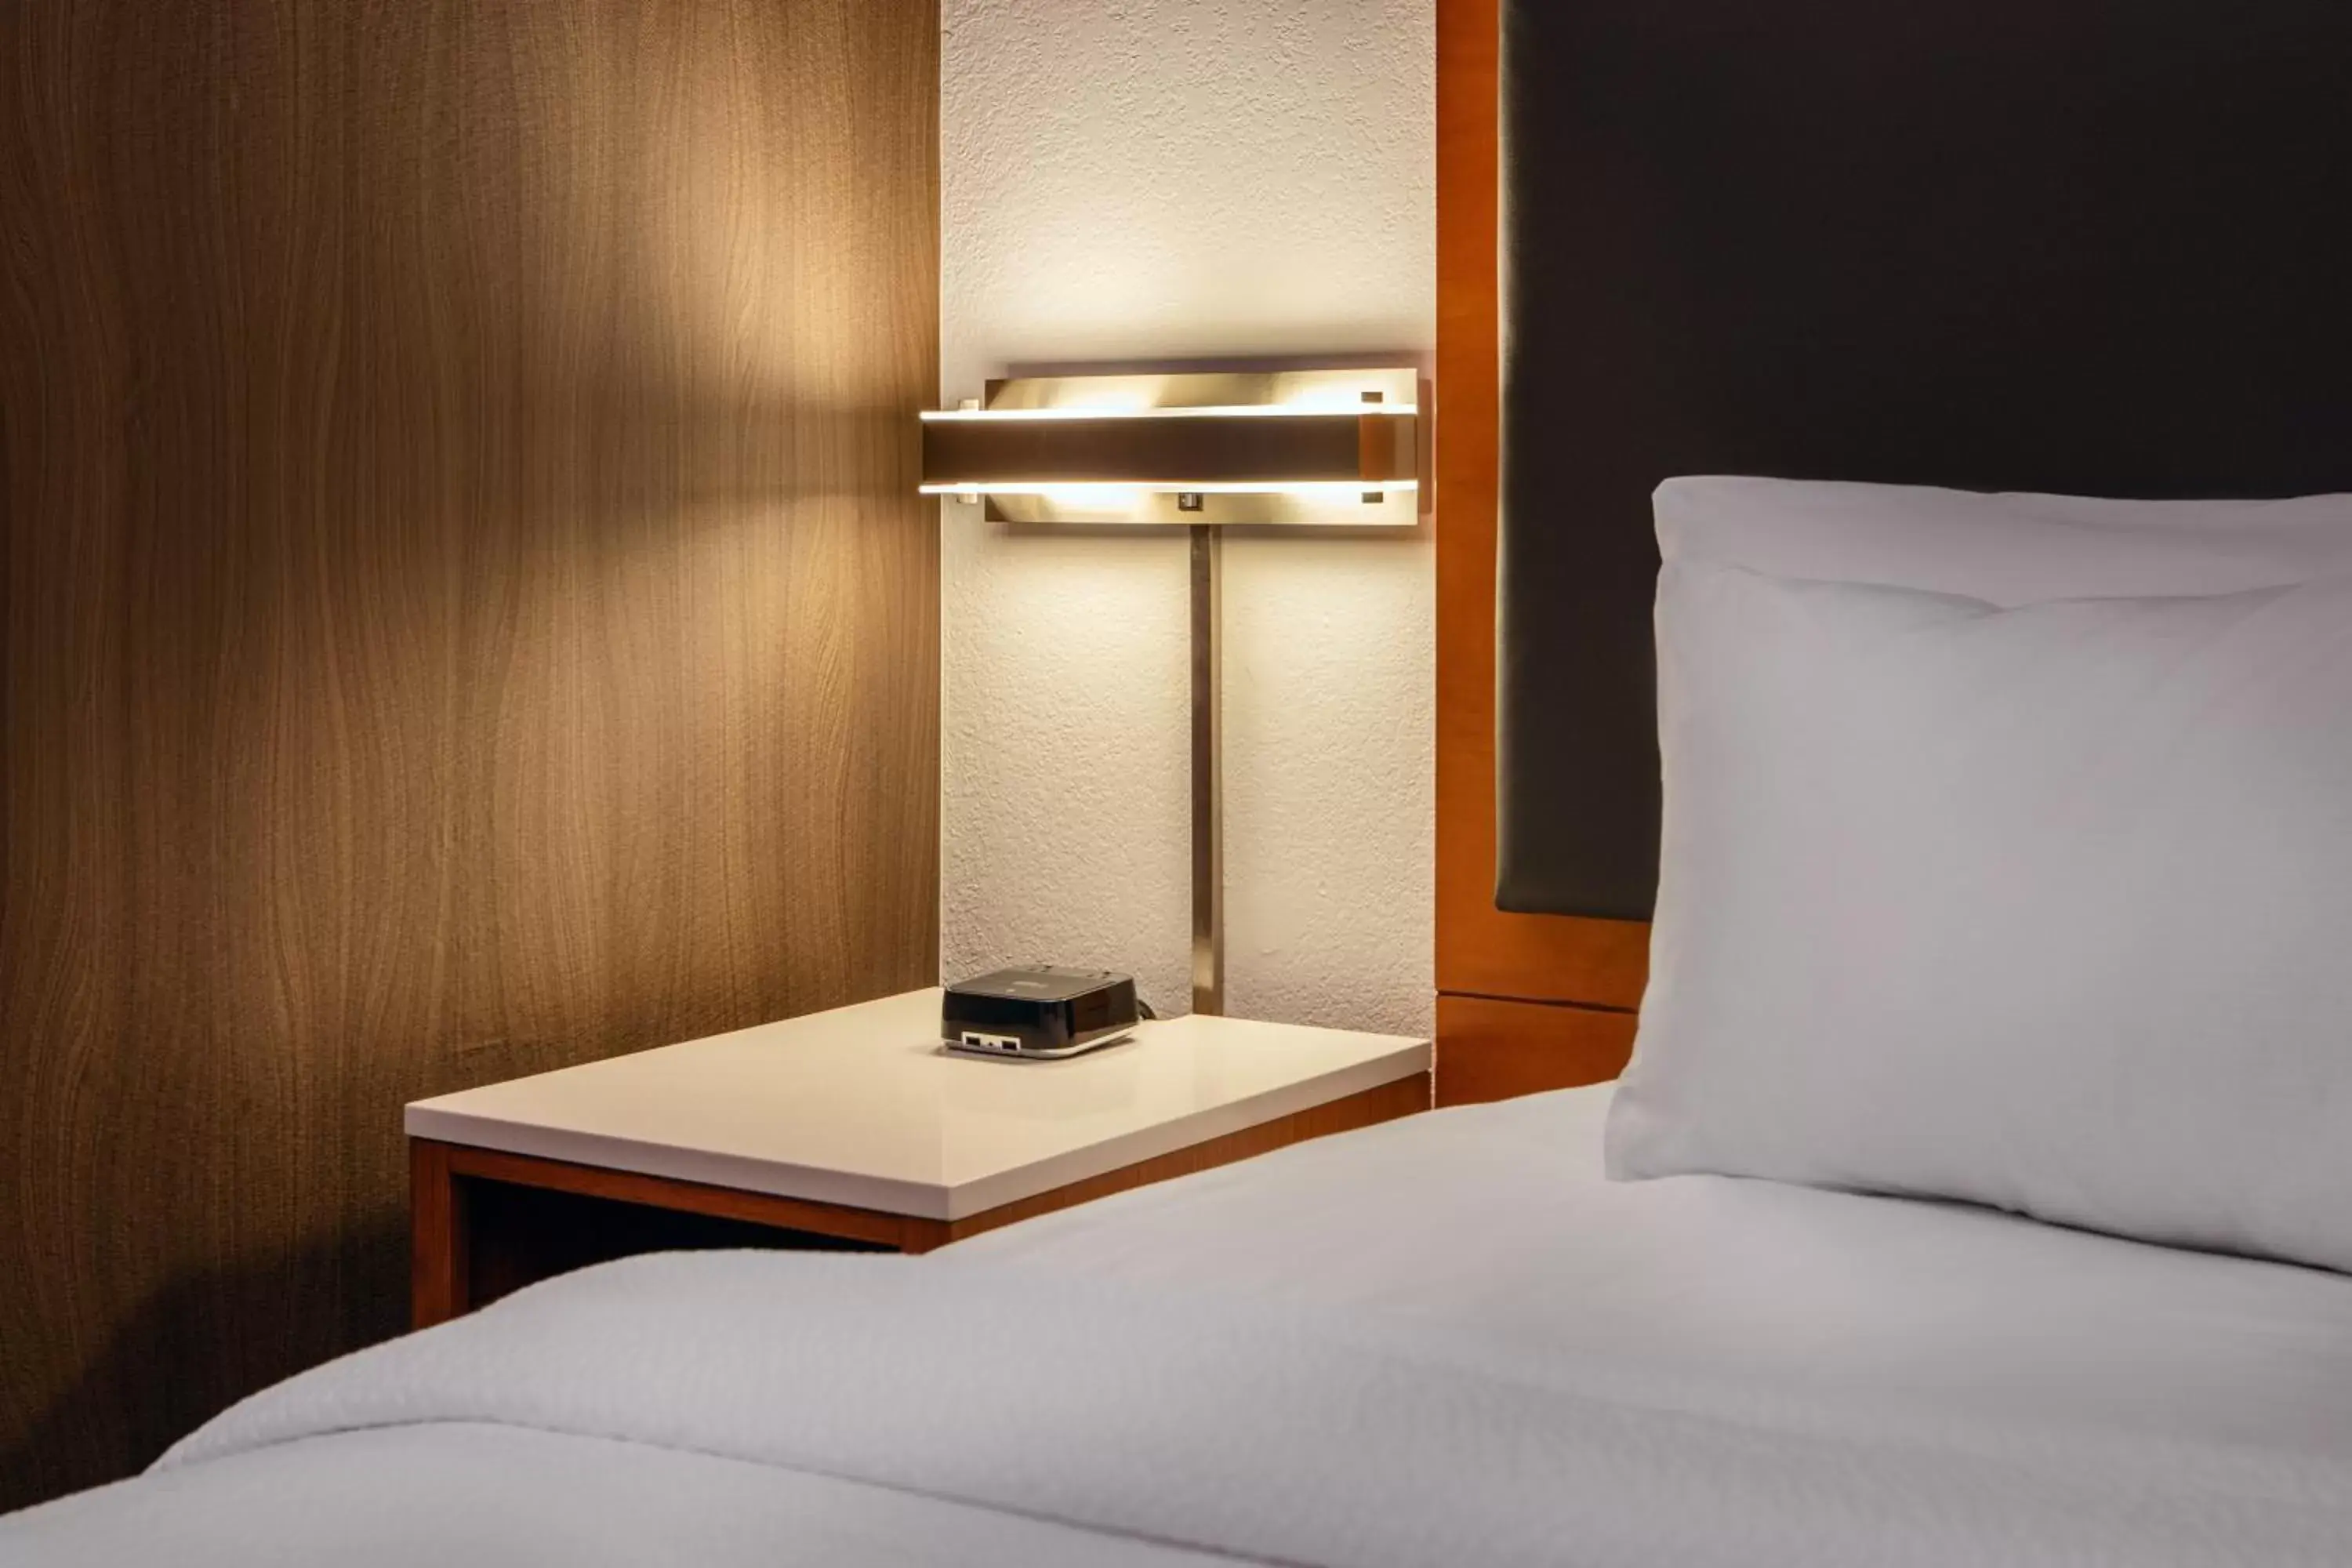 Guests, Bed in SpringHill Suites by Marriott Hershey Near The Park